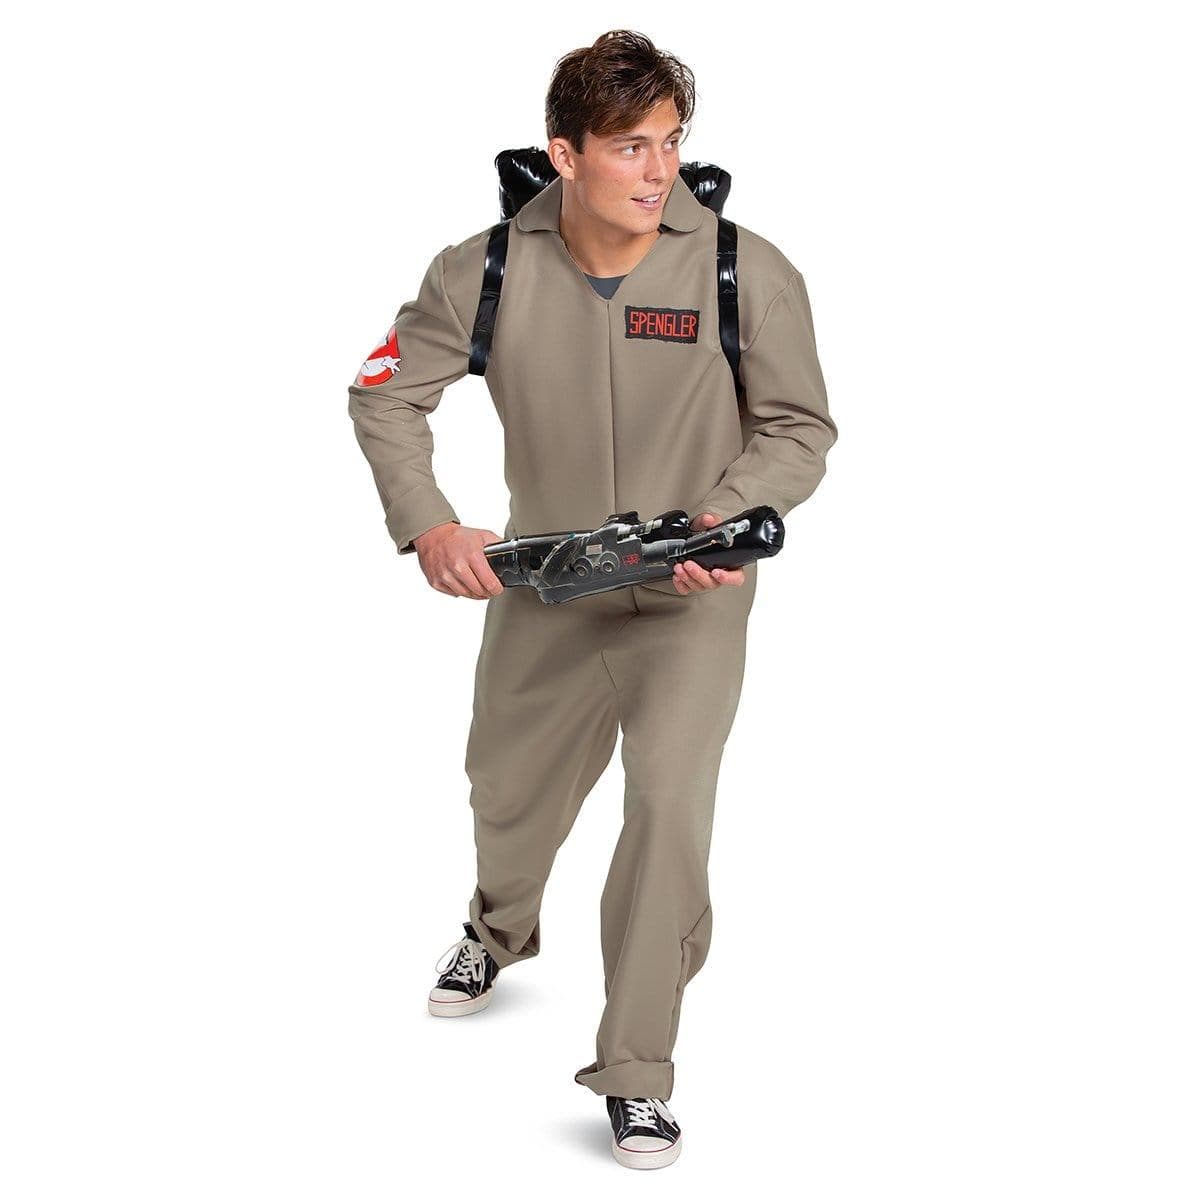 Buy Costumes Egon Spengler Classic Costume for Adults, Ghostbusters: Afterlife sold at Party Expert